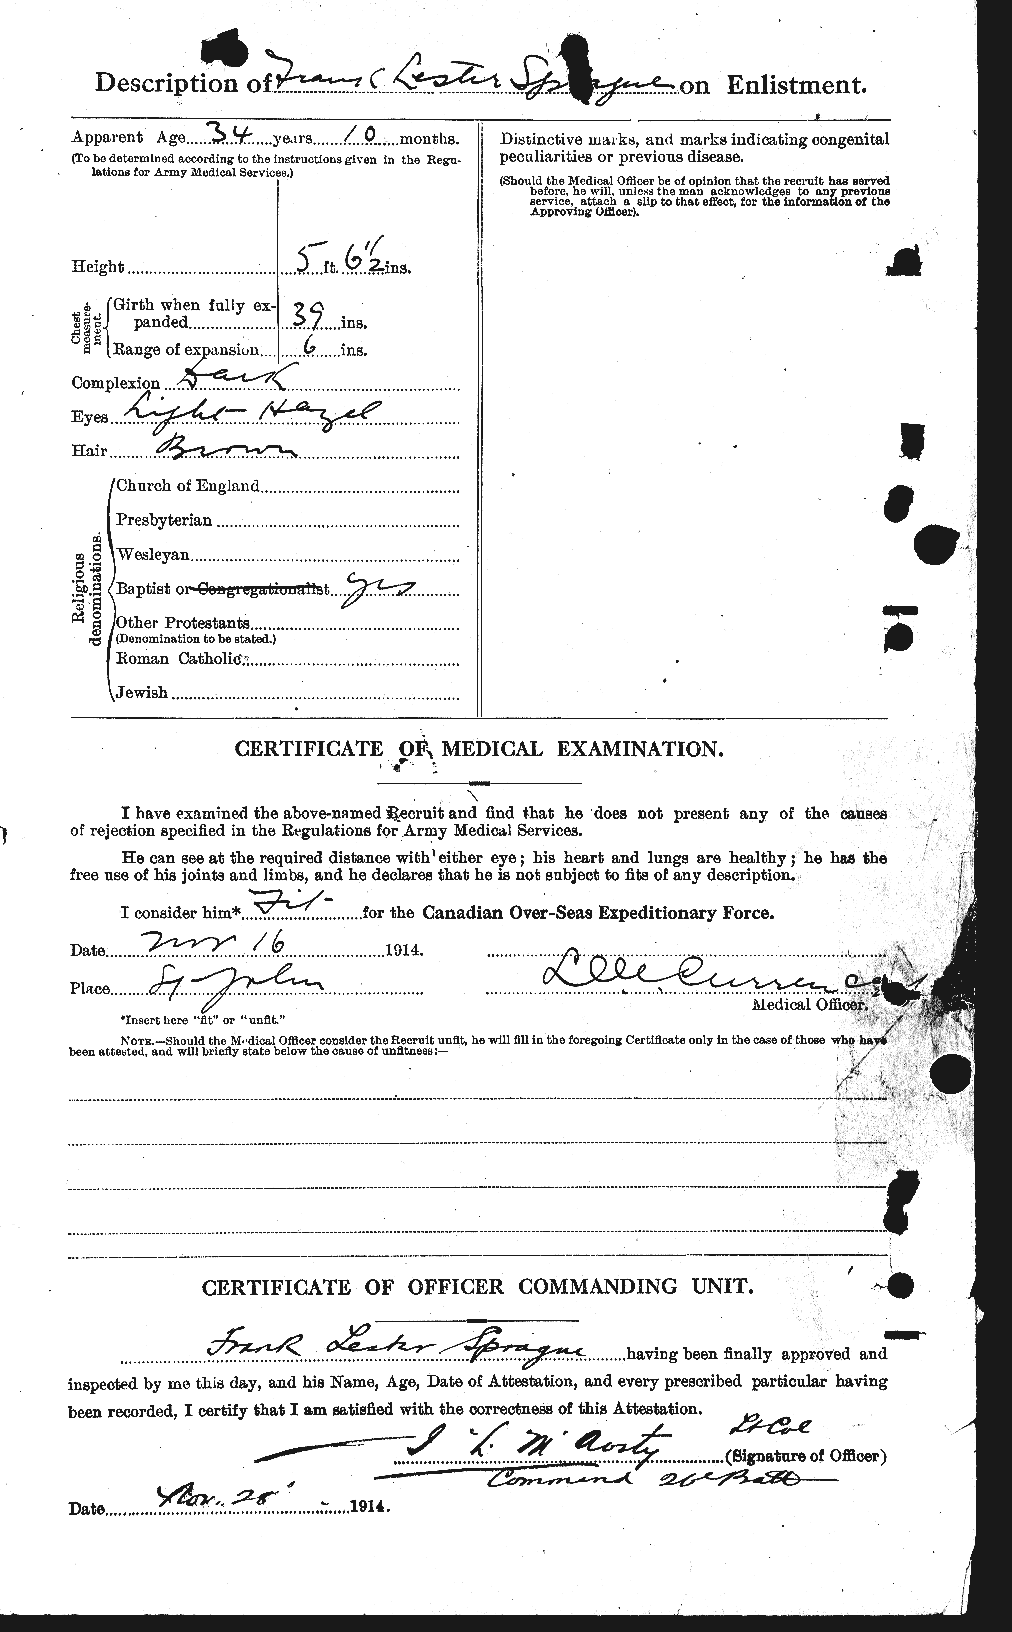 Personnel Records of the First World War - CEF 621461b